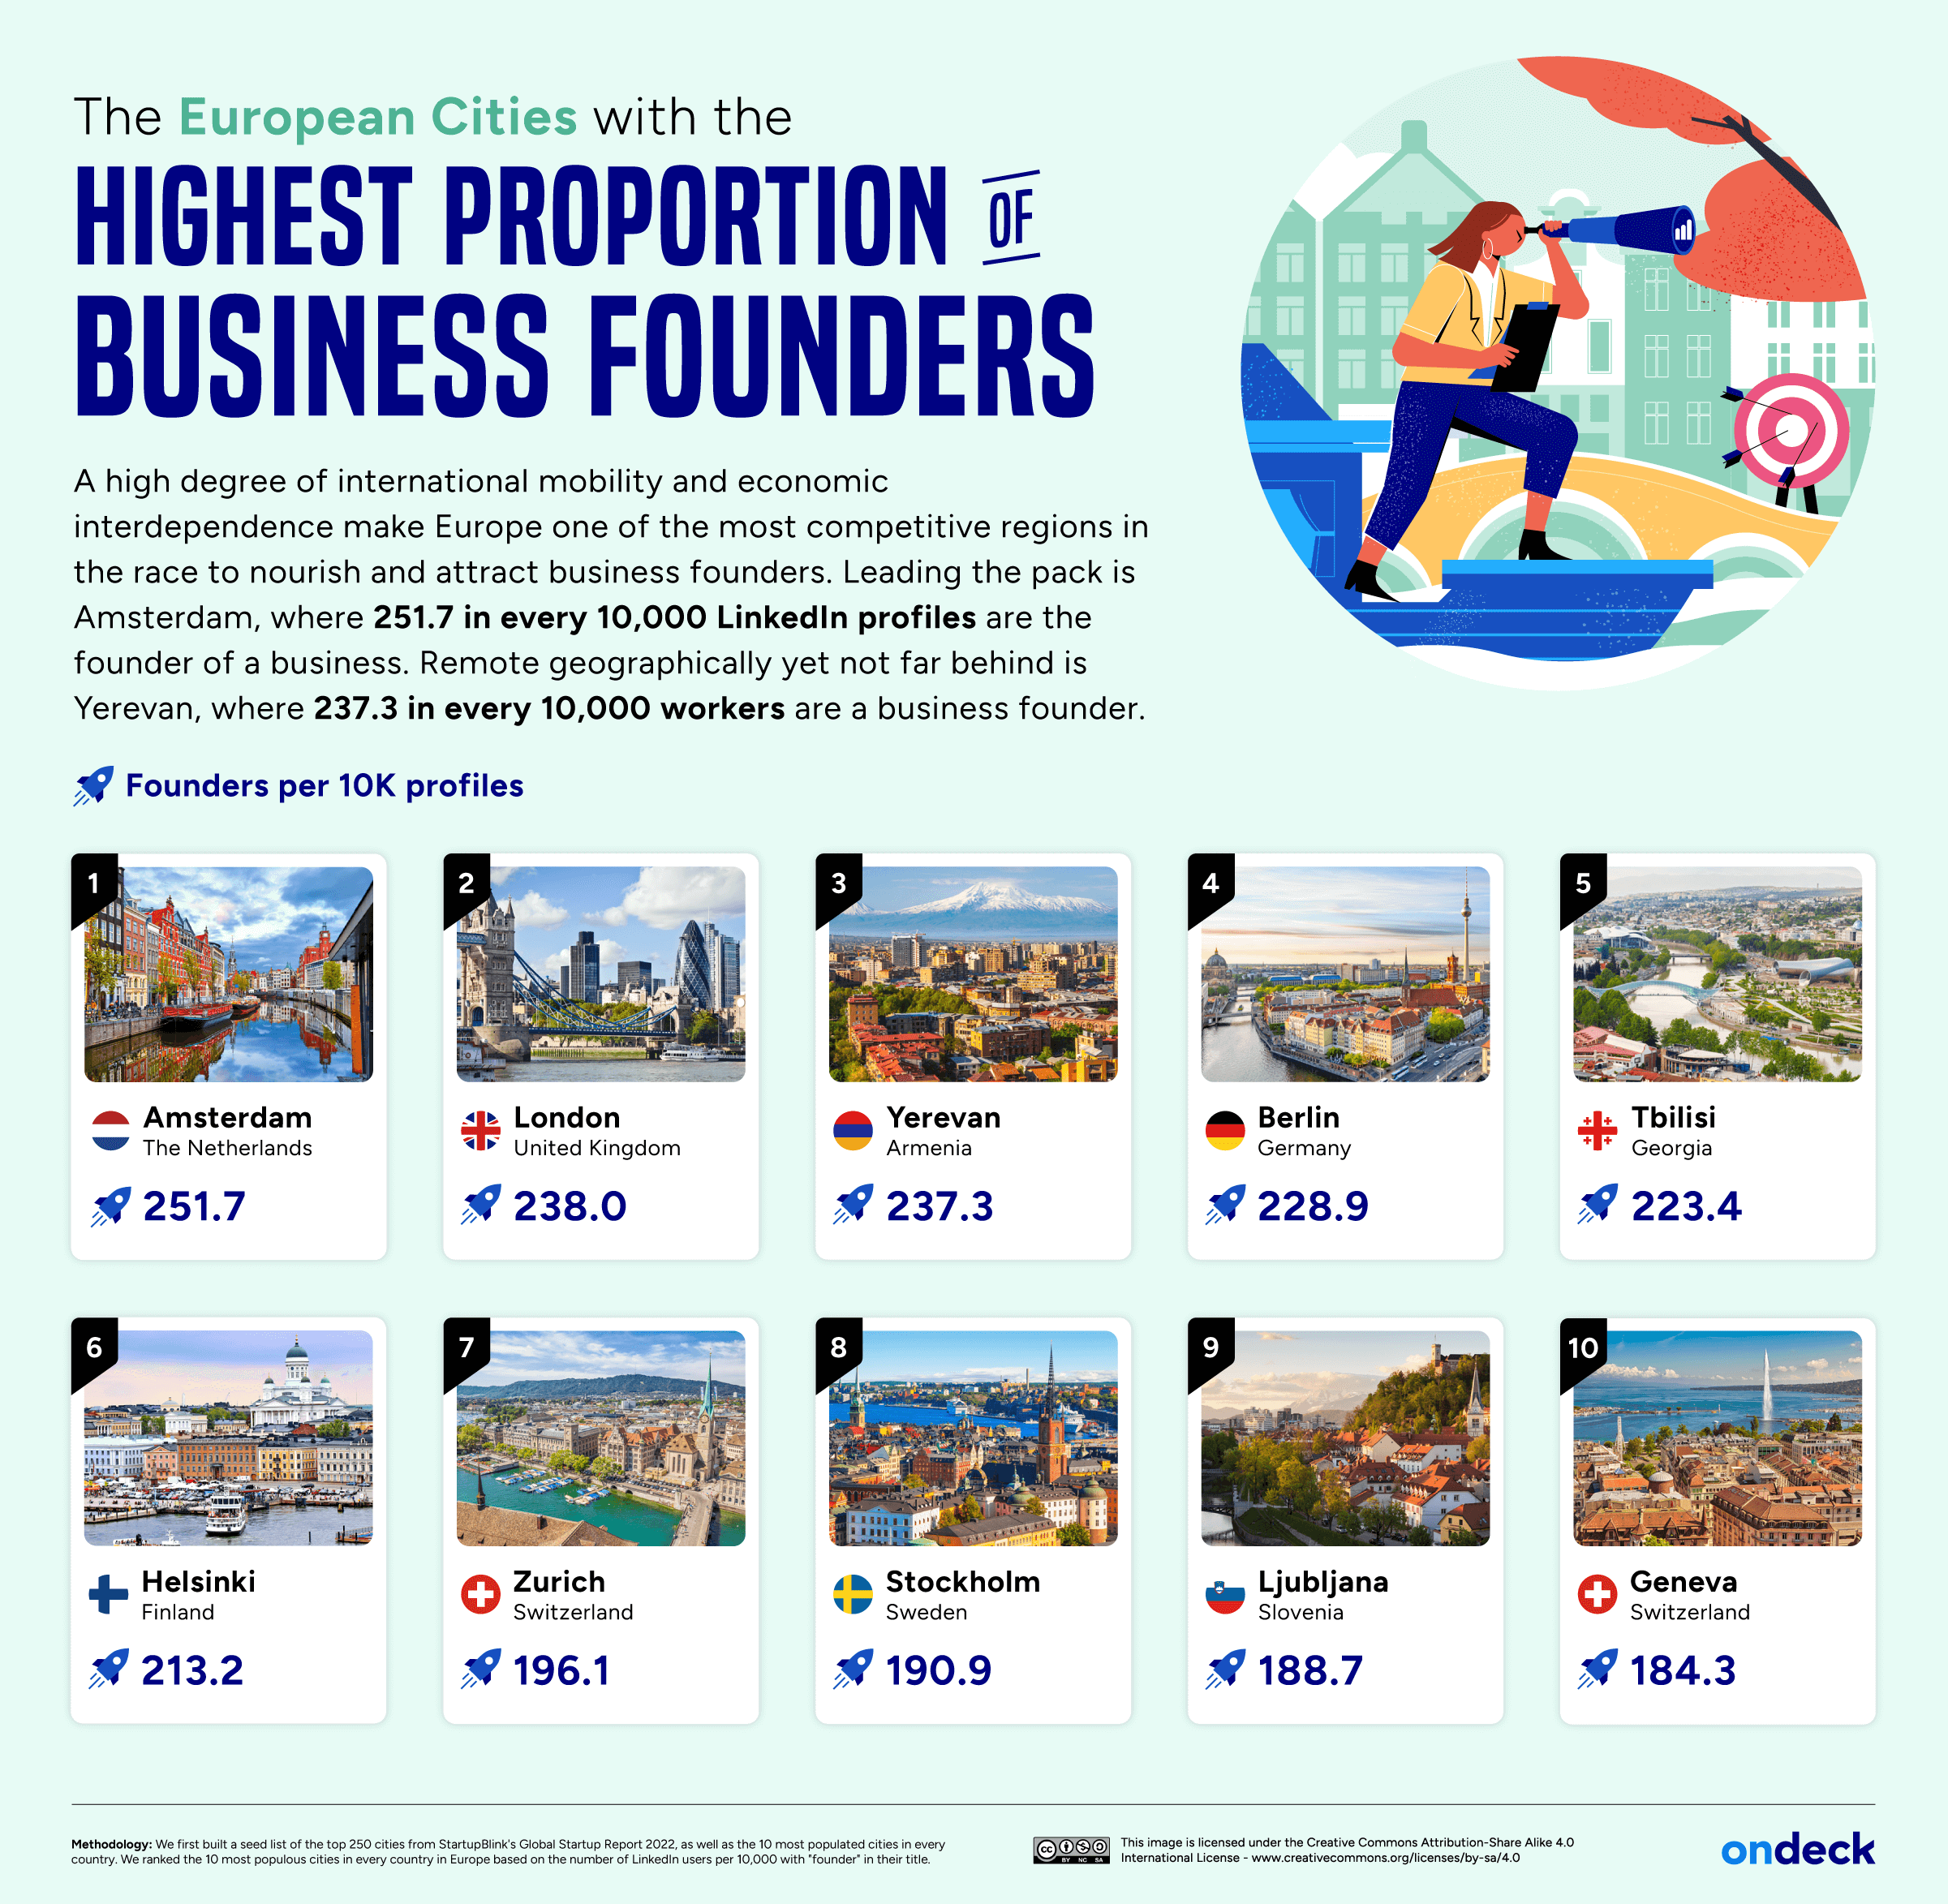 Infographic showing the European cities with the most business founders